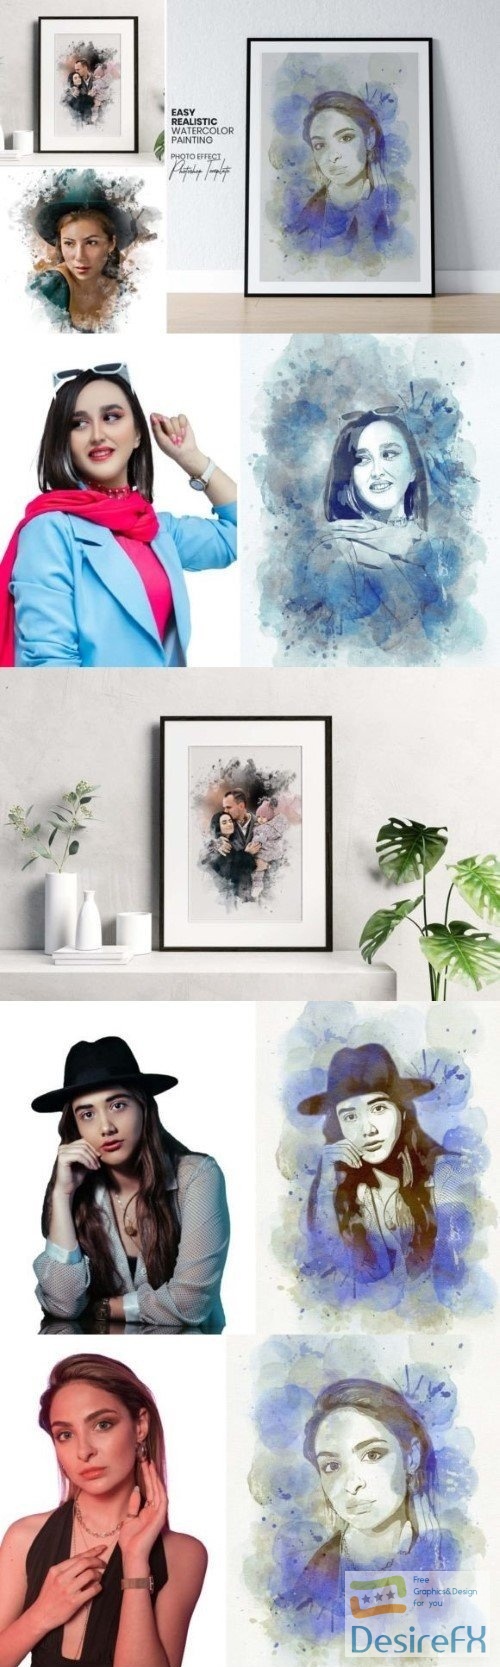 Easy Realistic Watercolor Painting - 21327947